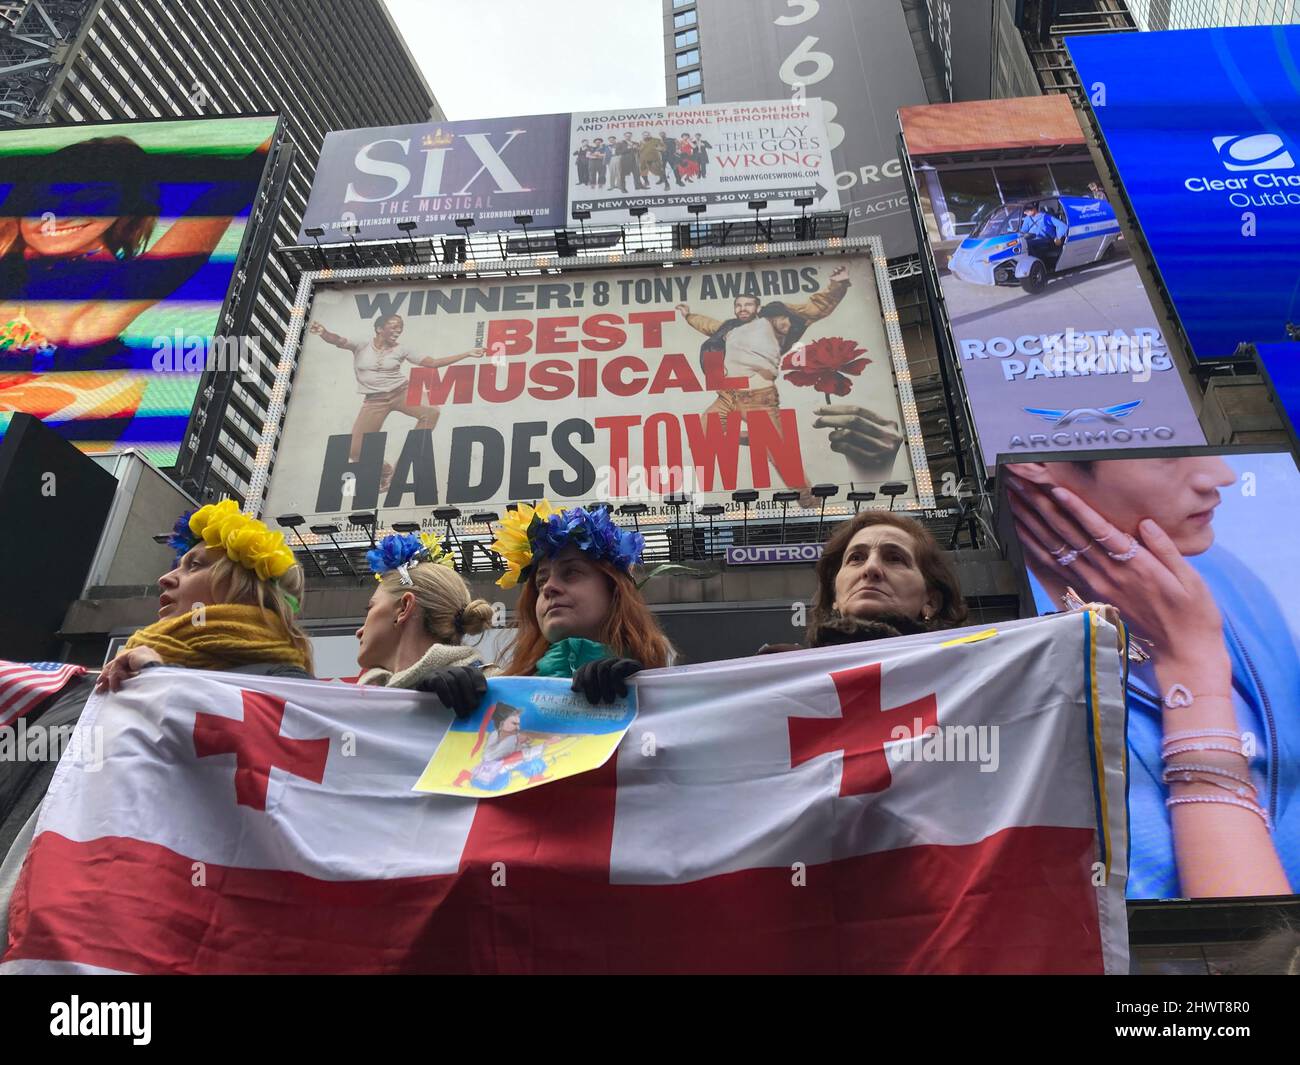 Ukrainian-Americans and their supporters protest the Russian invasion and show support for the citizens of the Ukraine, in Times Square in New York on Saturday, March 5, 2022. (© Frances M. Roberts) Stock Photo